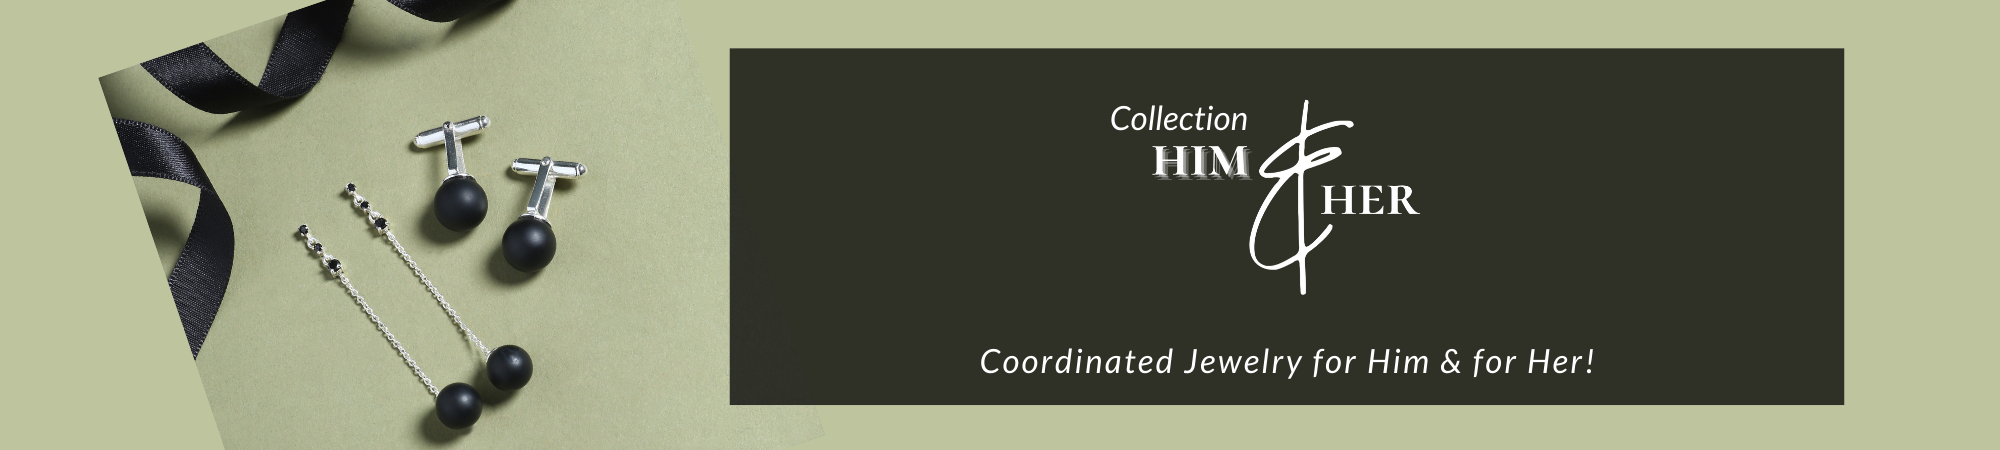 His & Her Jewelry Collection By Nirwaana